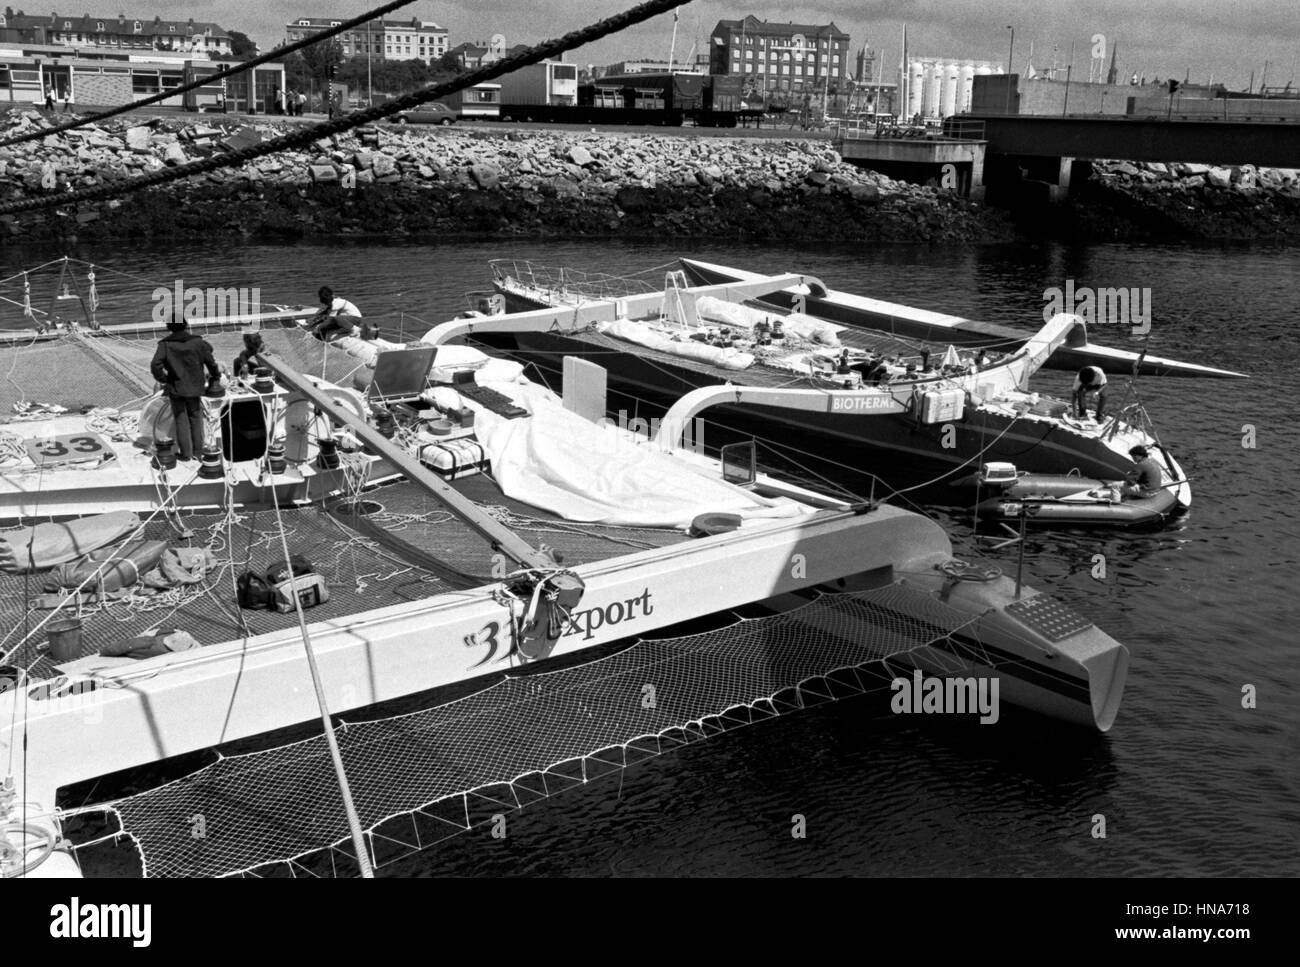 AJAXNETPHOTO. 1 JUNE,1984.PLYMOUTH, ENGLAND. -OSTAR RACE-  FRENCH YACHTS 33 EXPORT AND BIOTHERM UNDERGOING REPAIRS IN MILBAY DOCK. PHOTO:JONATHAN EASTLAND/AJAX  REF:840106 20 Stock Photo